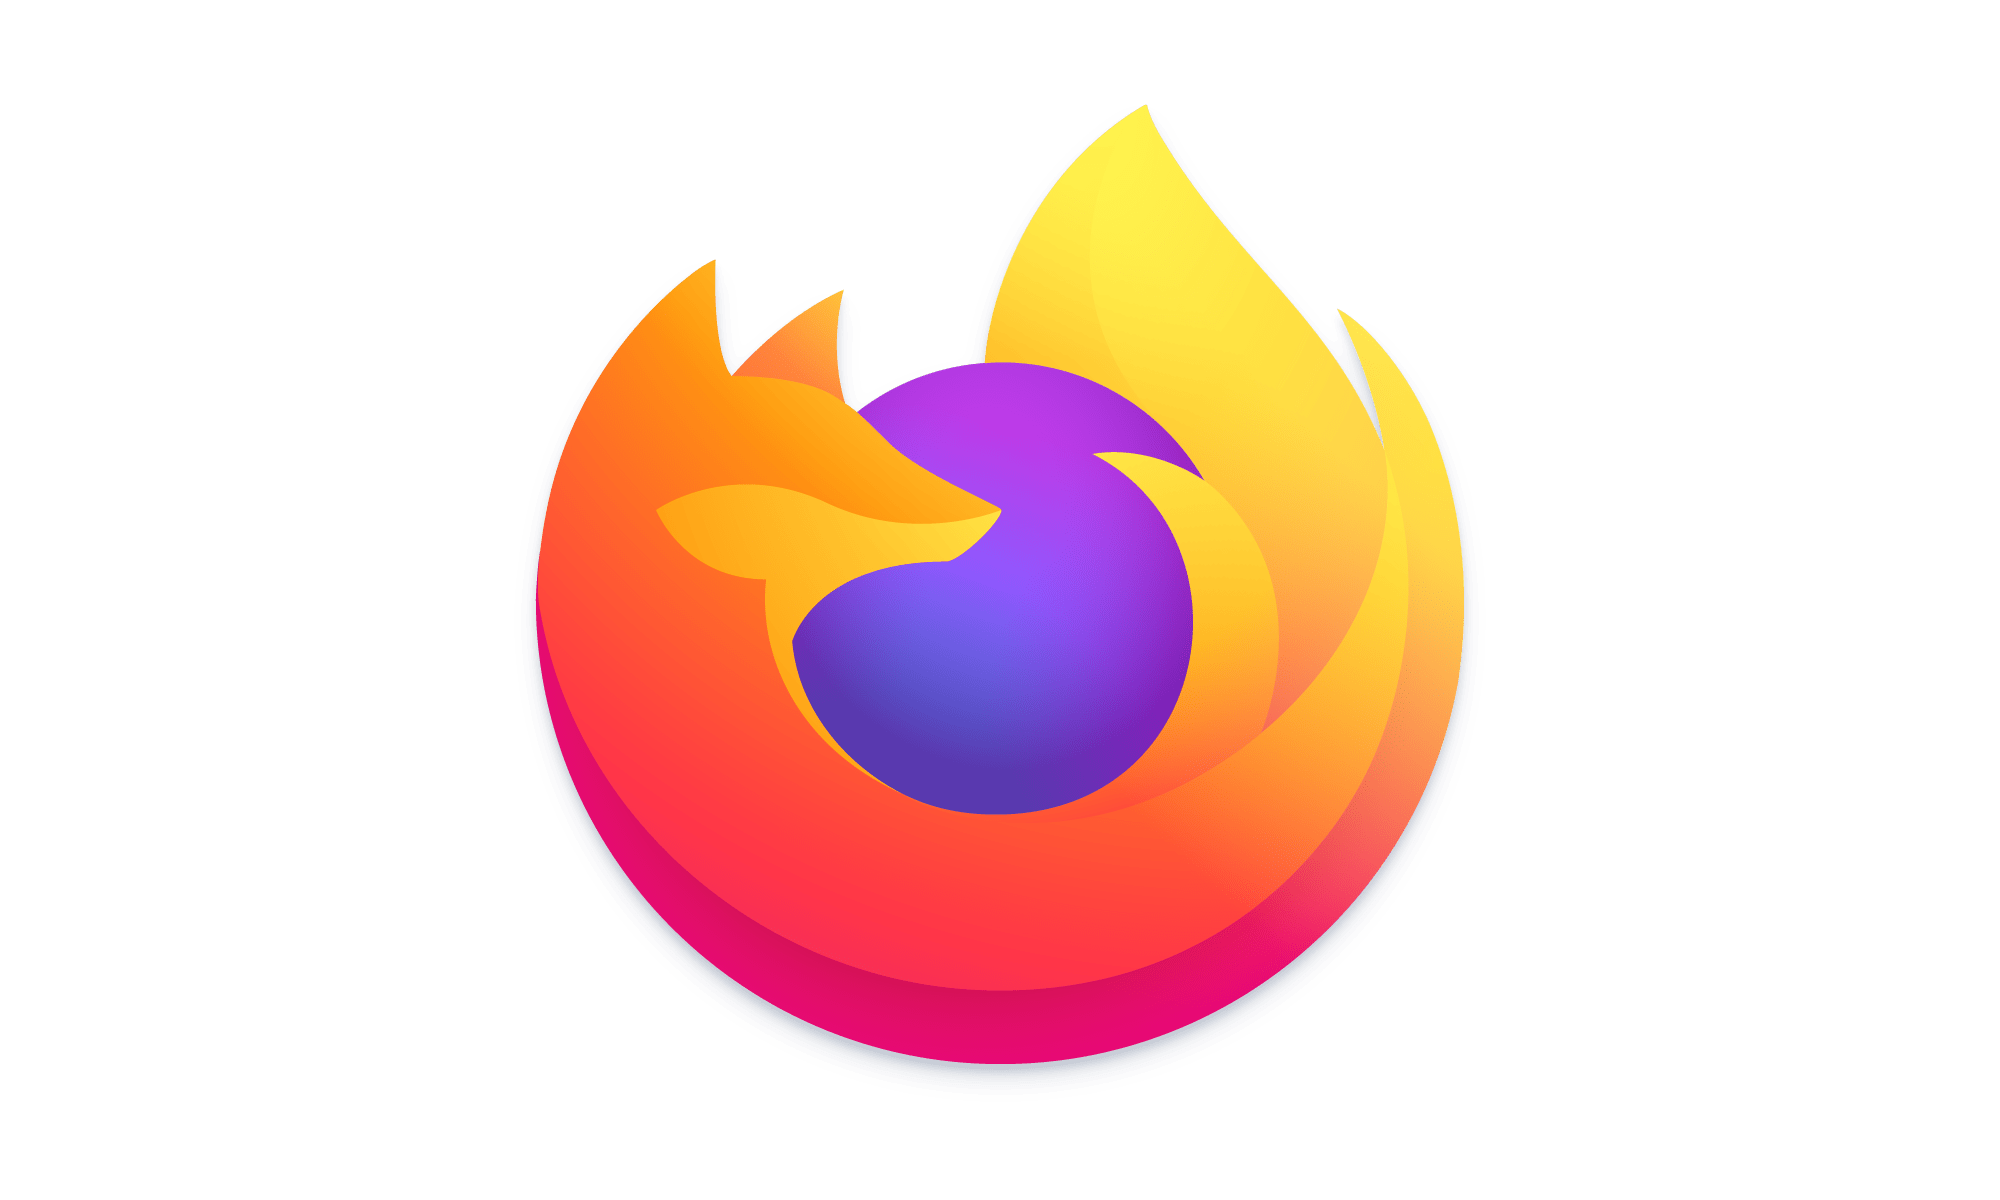 download firefox for mac m1